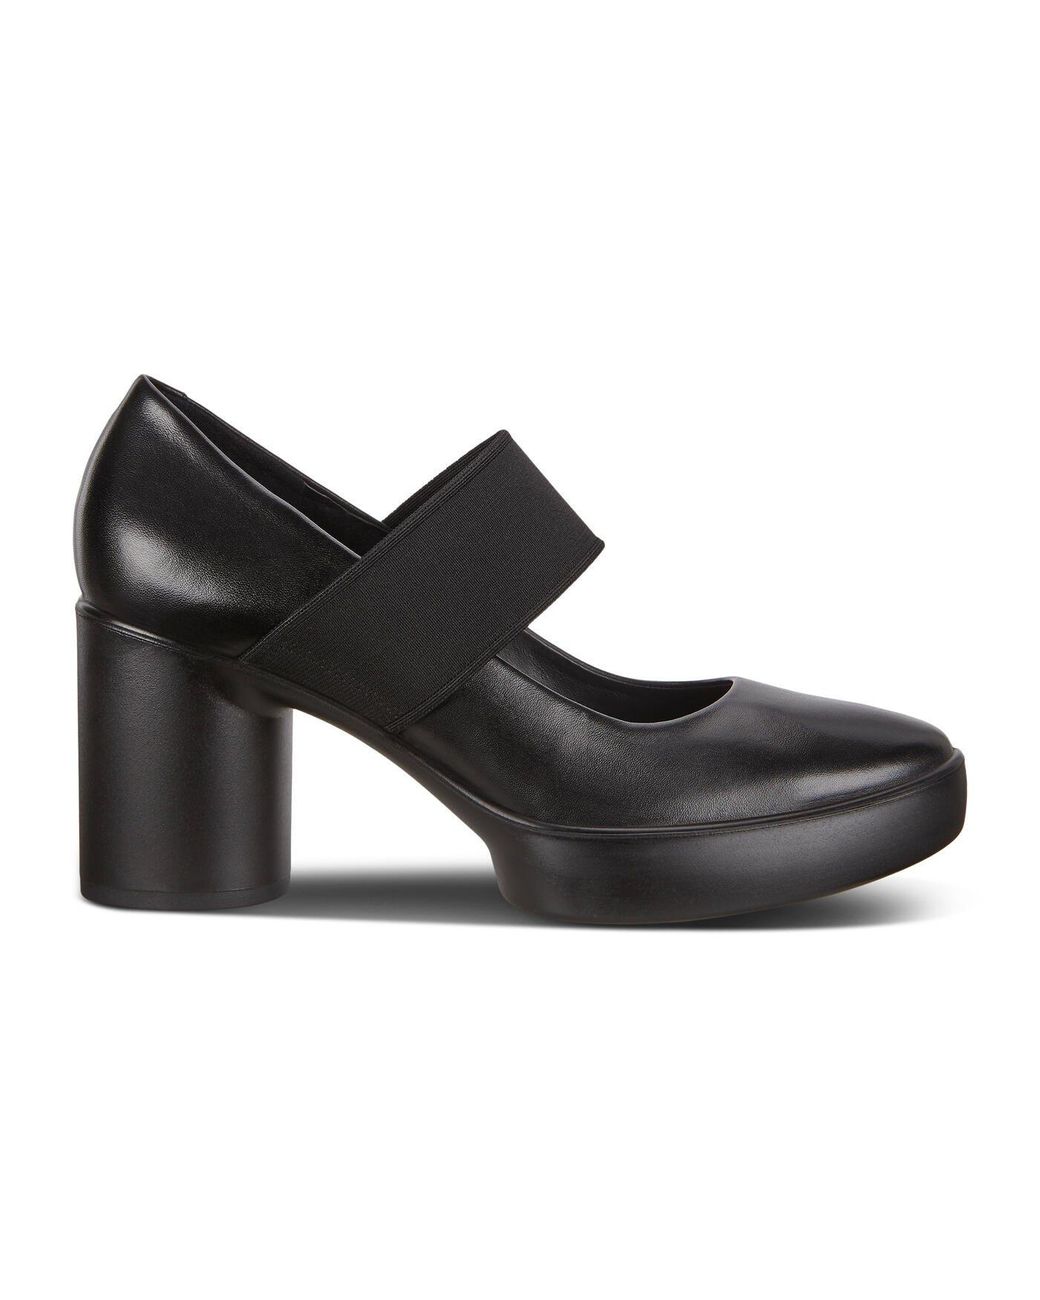 Ecco Shape Sculpted Motion 55 Mary Janes in Black | Lyst